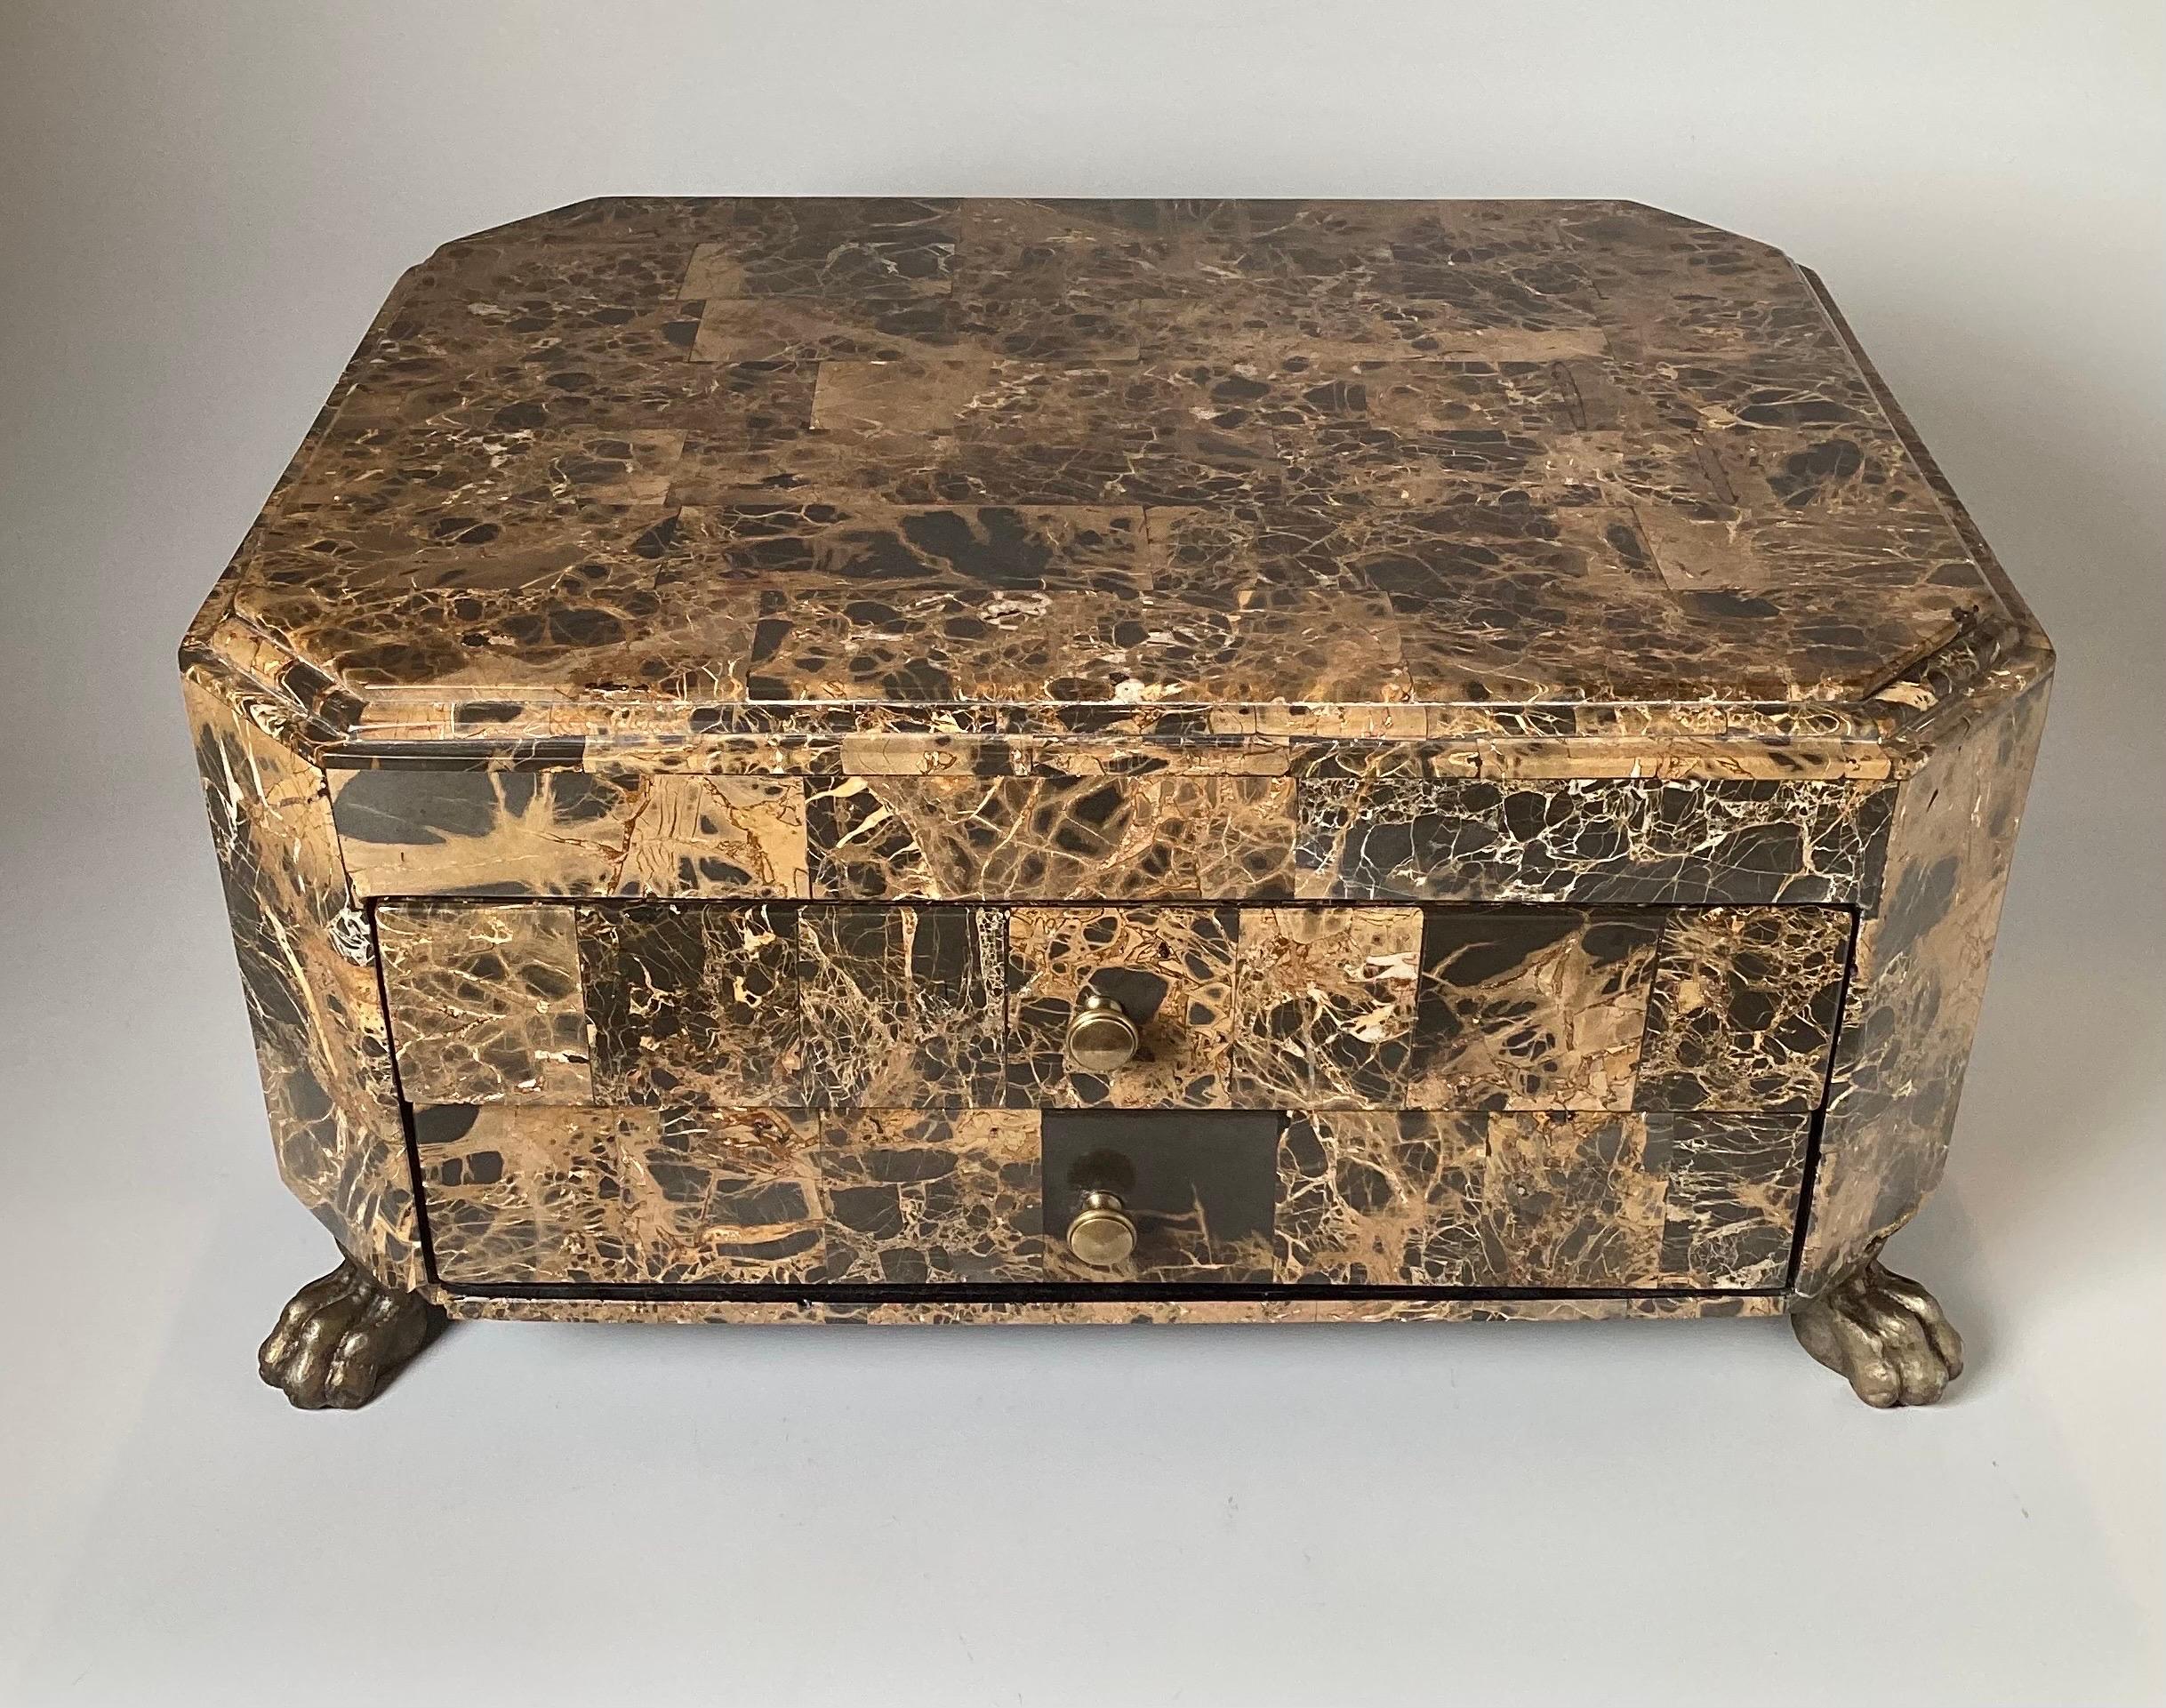 A Chic neoclassical hardstone table box with two drawers, The variegated brown, white and gray stone box with two front drawers resting on brass paw feet.